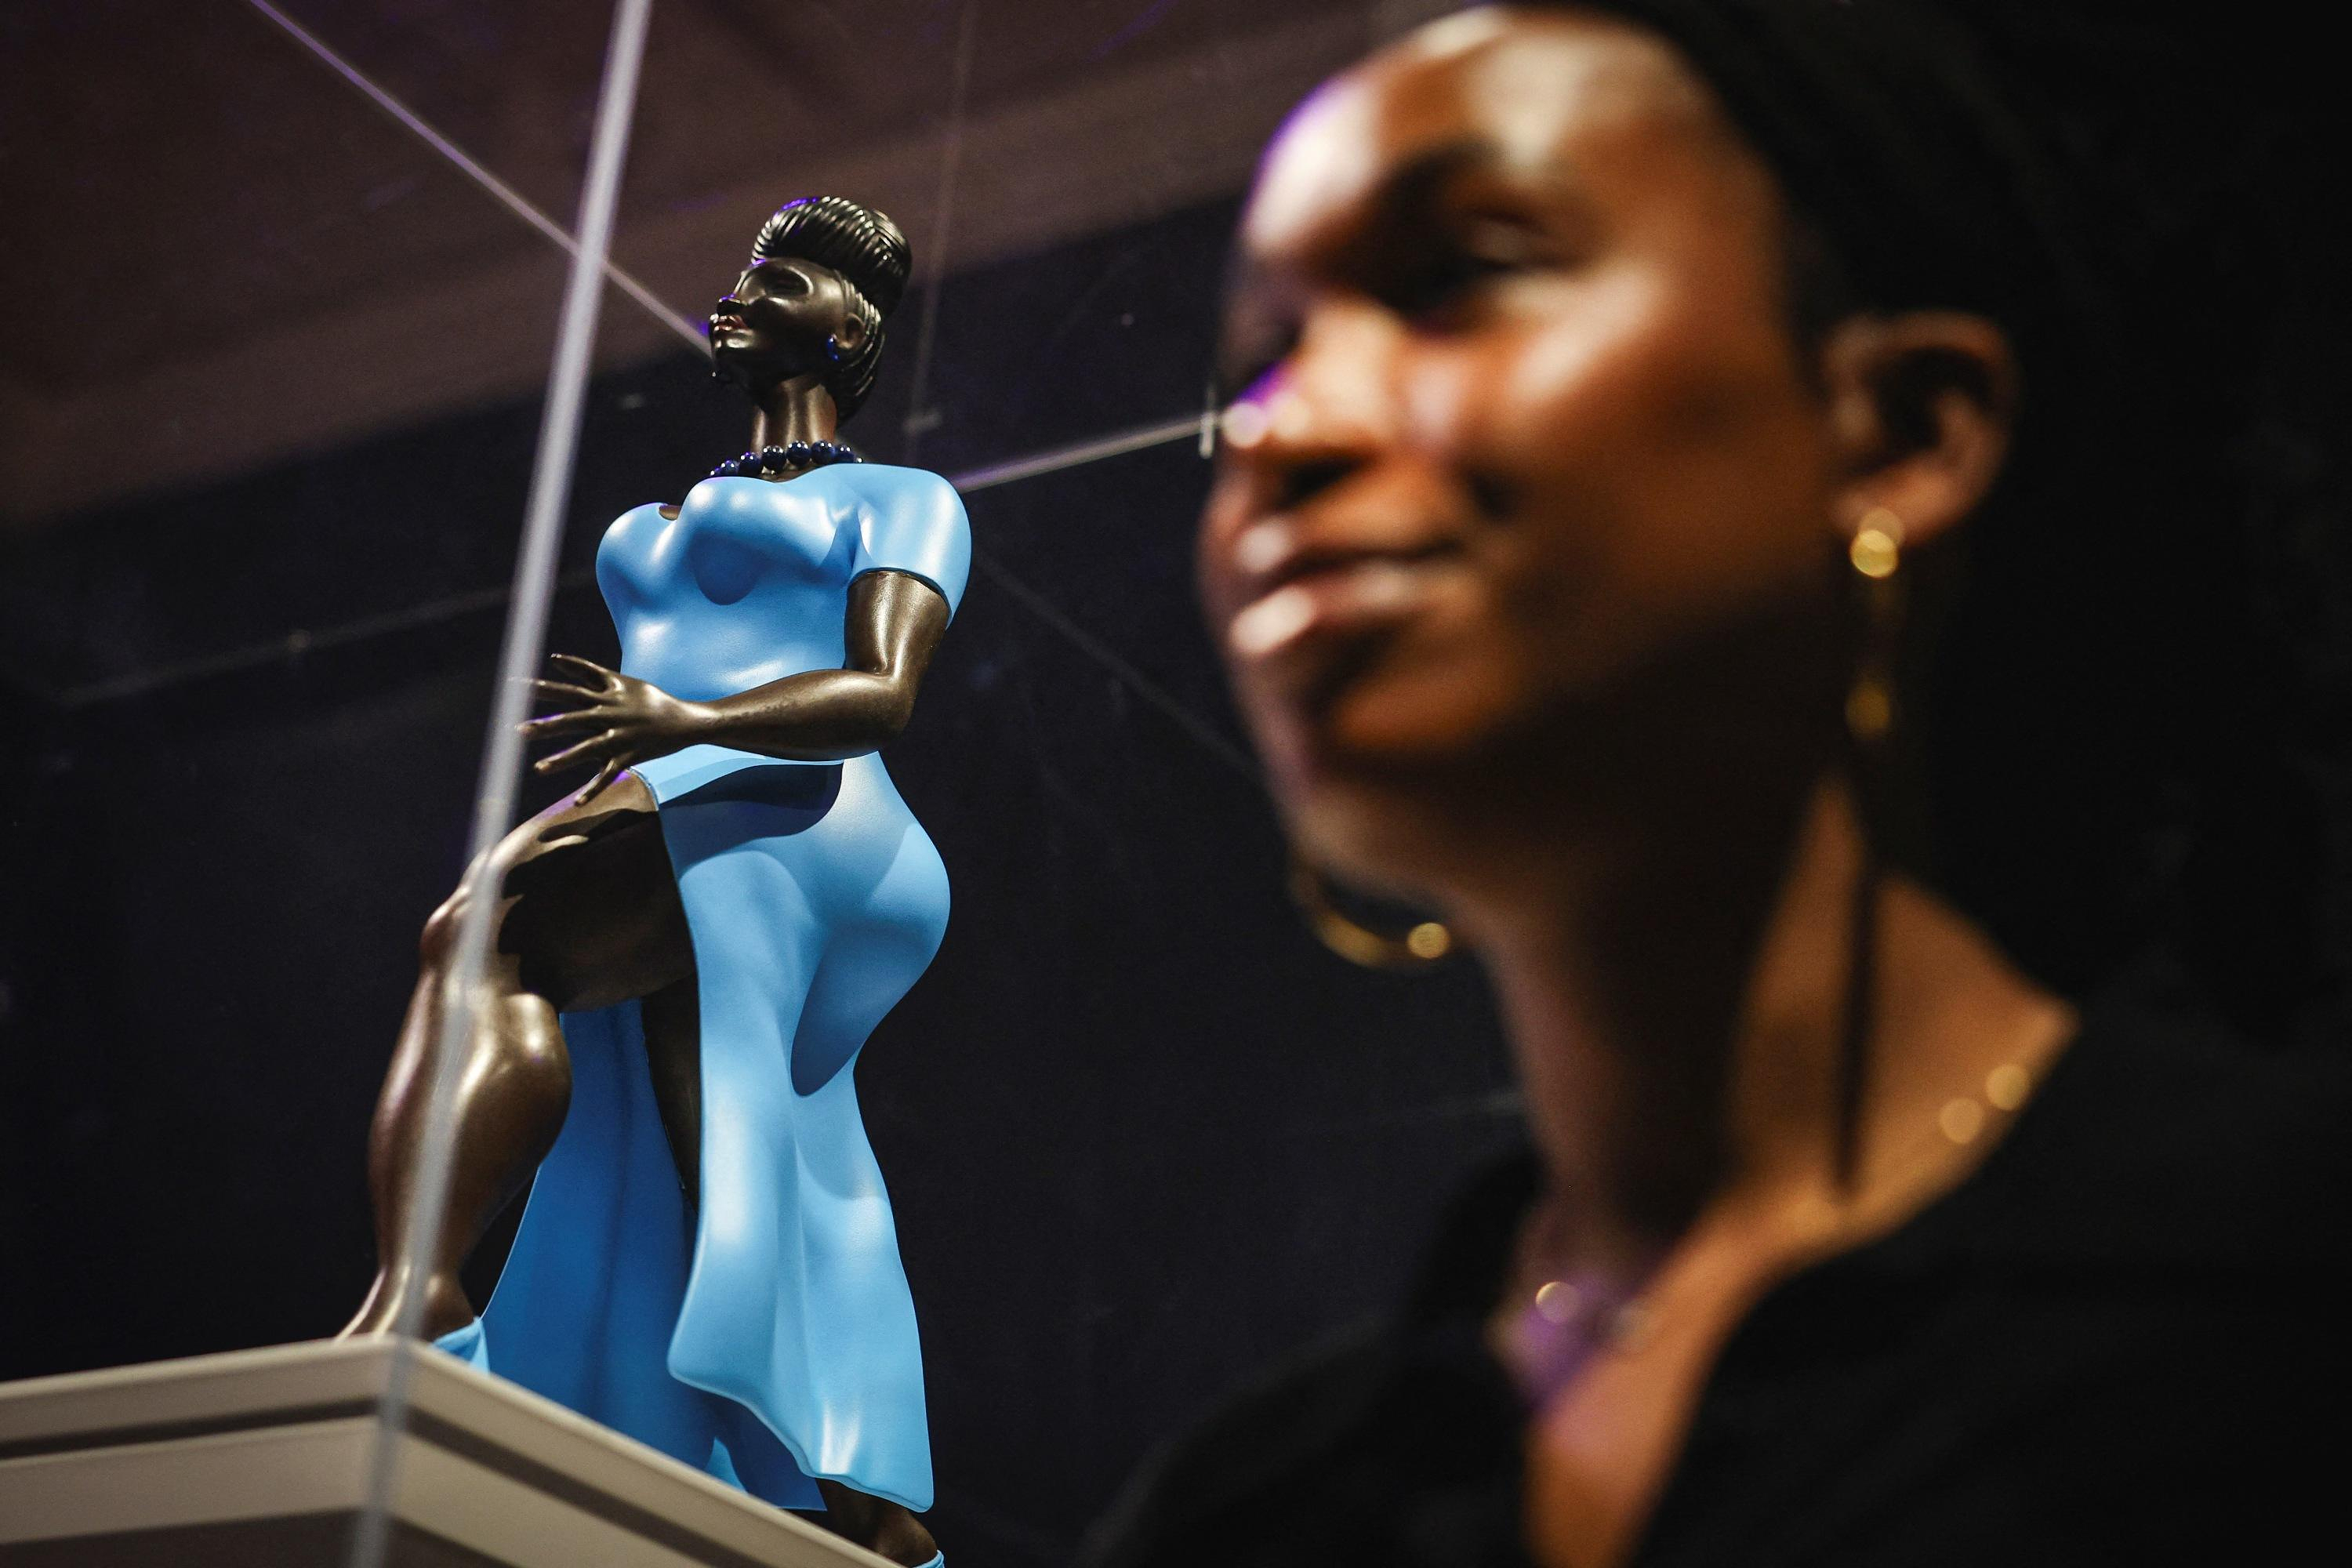 The “Lady in Blue”, statue of a black woman who celebrates the “Londonian”, soon to be exhibited in Trafalgar Square